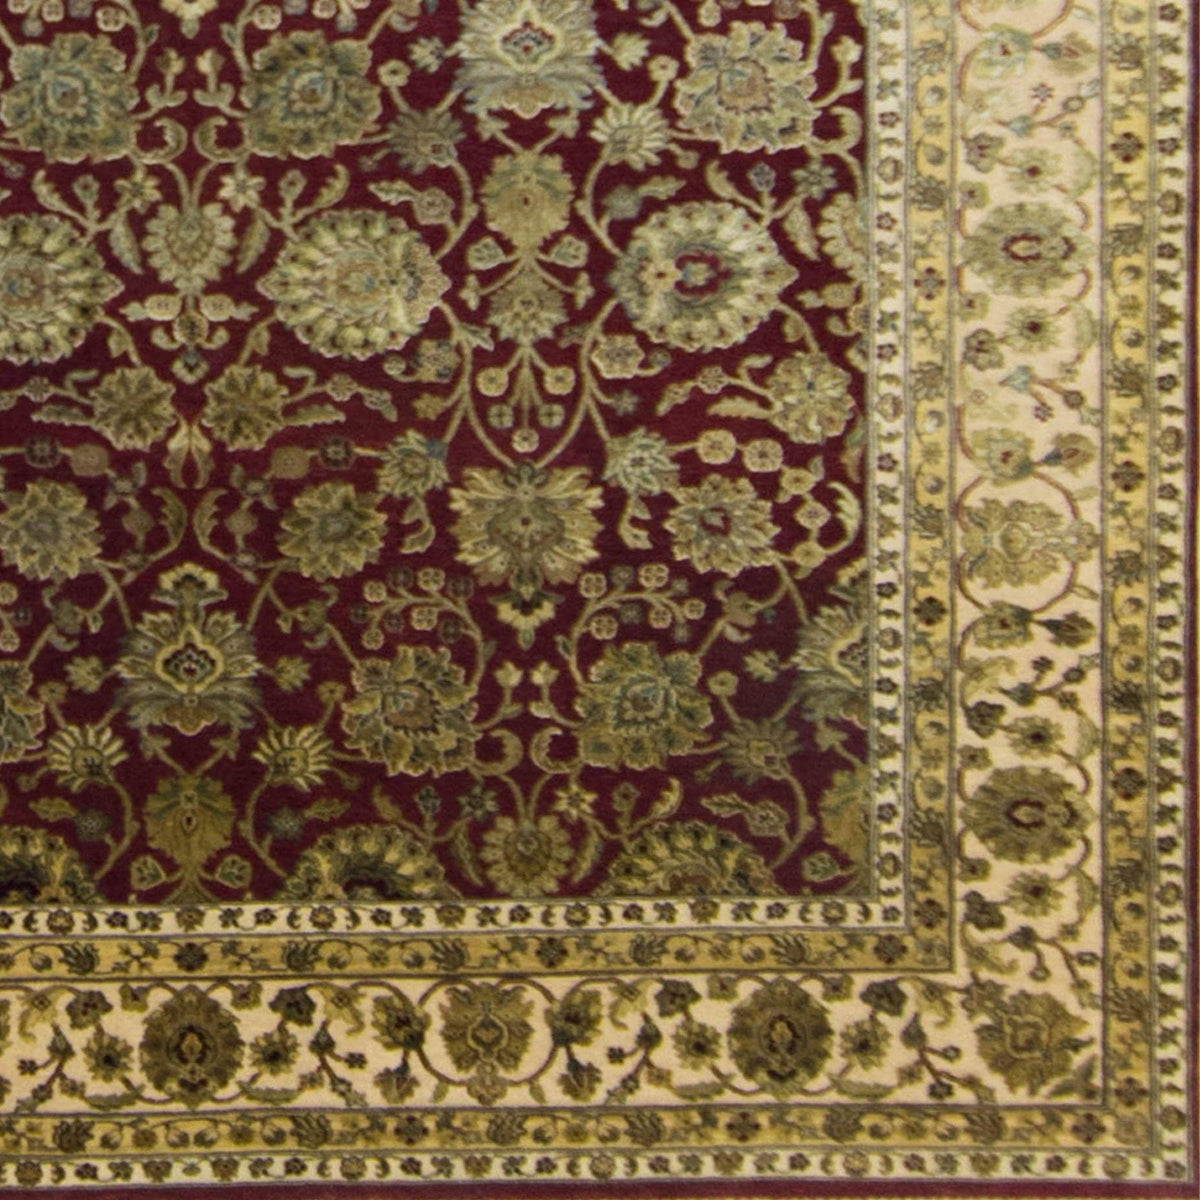 Fine Quality Hand-knotted Wool &amp; Silk Rug 251cm x 315cm